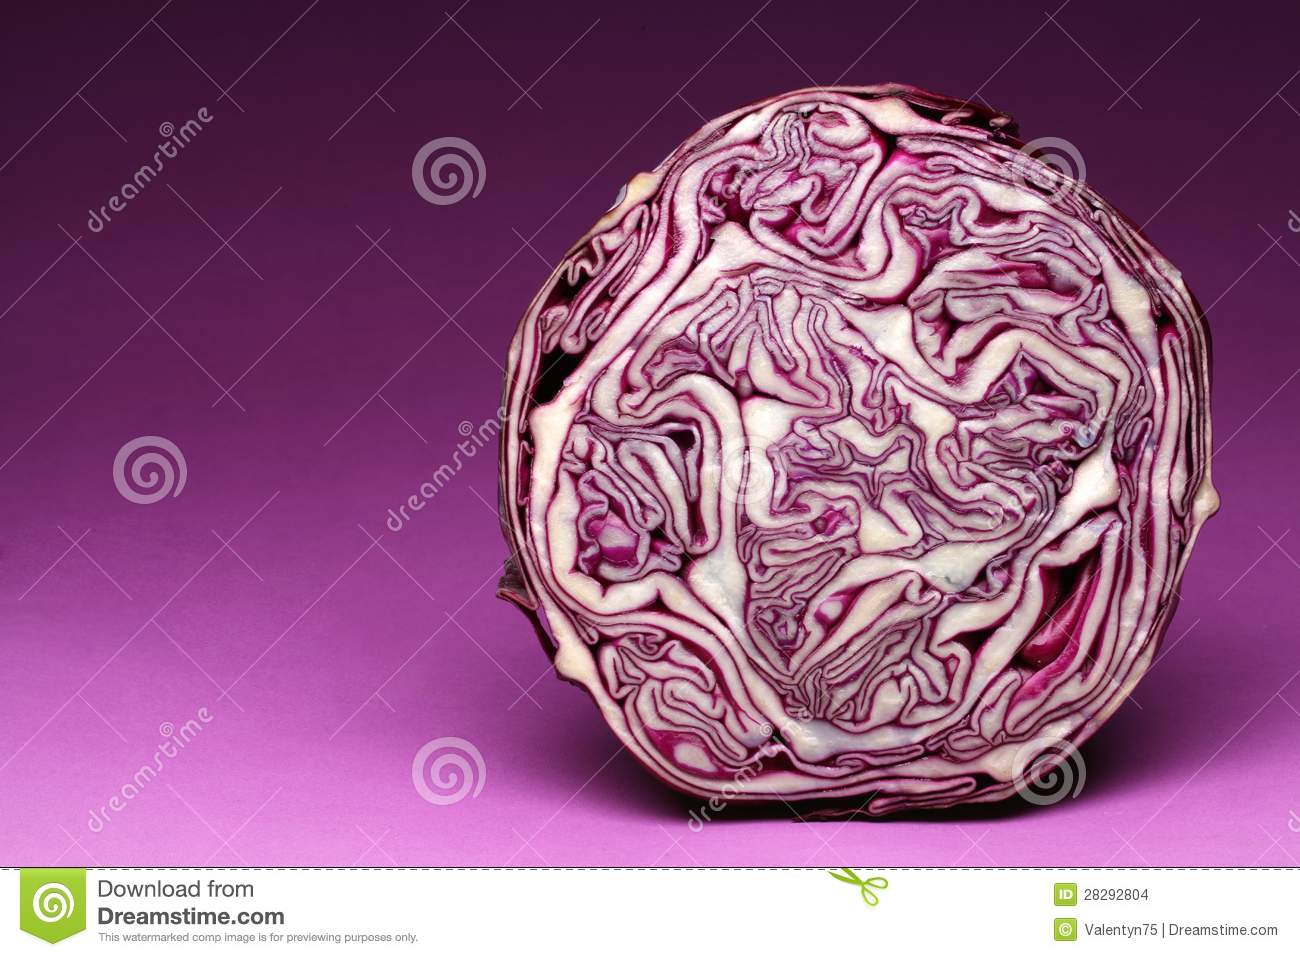 Purple Cabbage  Stock Images   Image  28292804